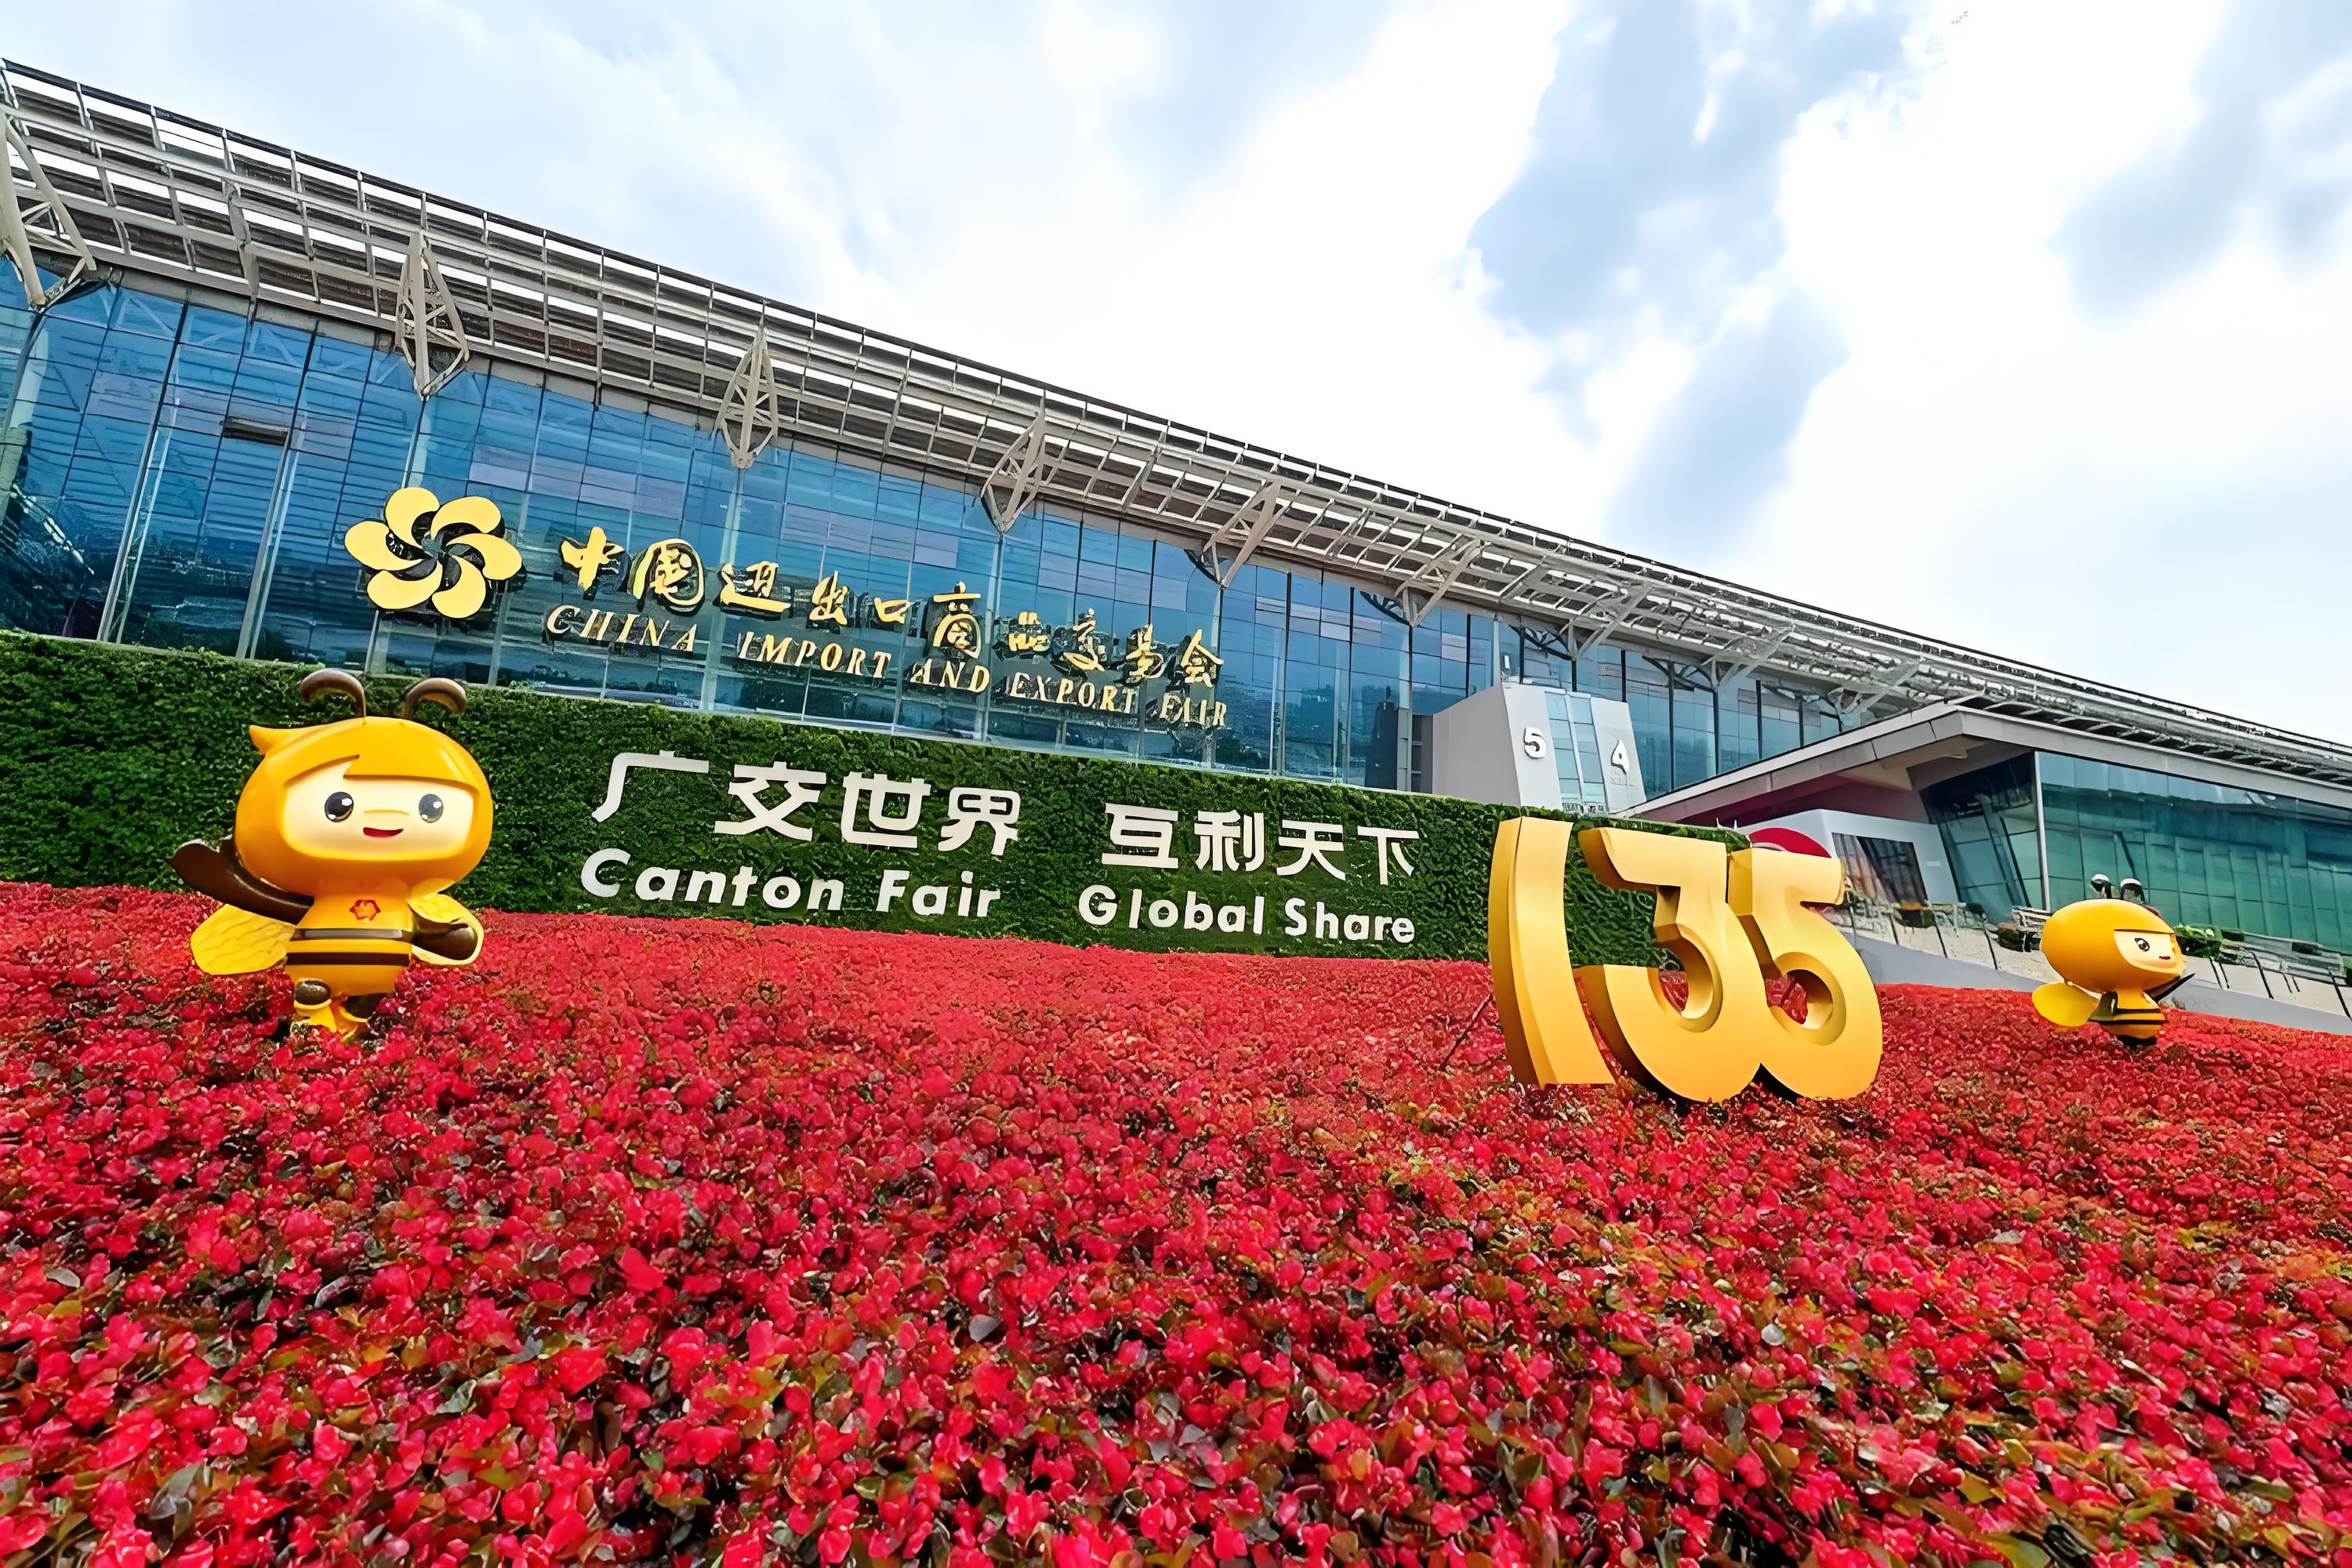 Welcome to visit us at 135th Canton Fair